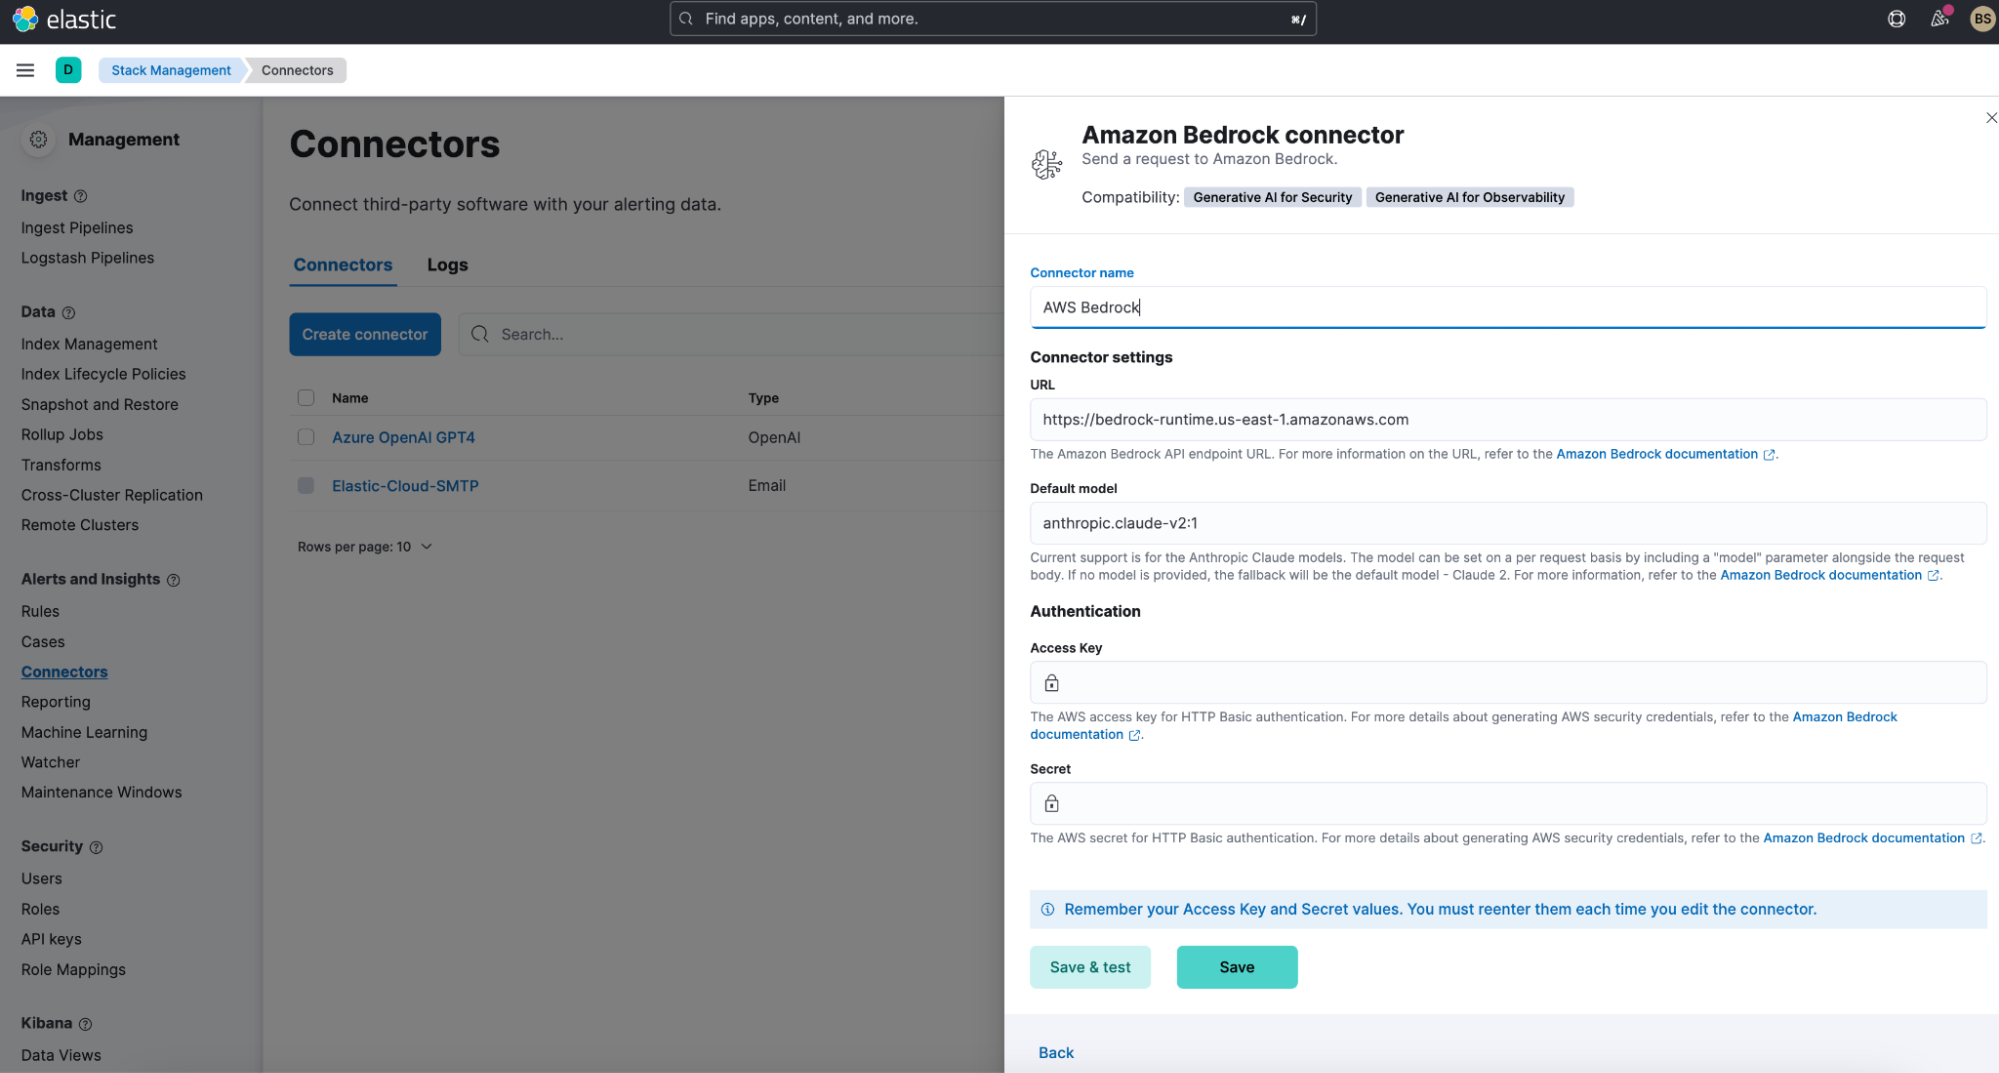 aws bedrock support connector config page